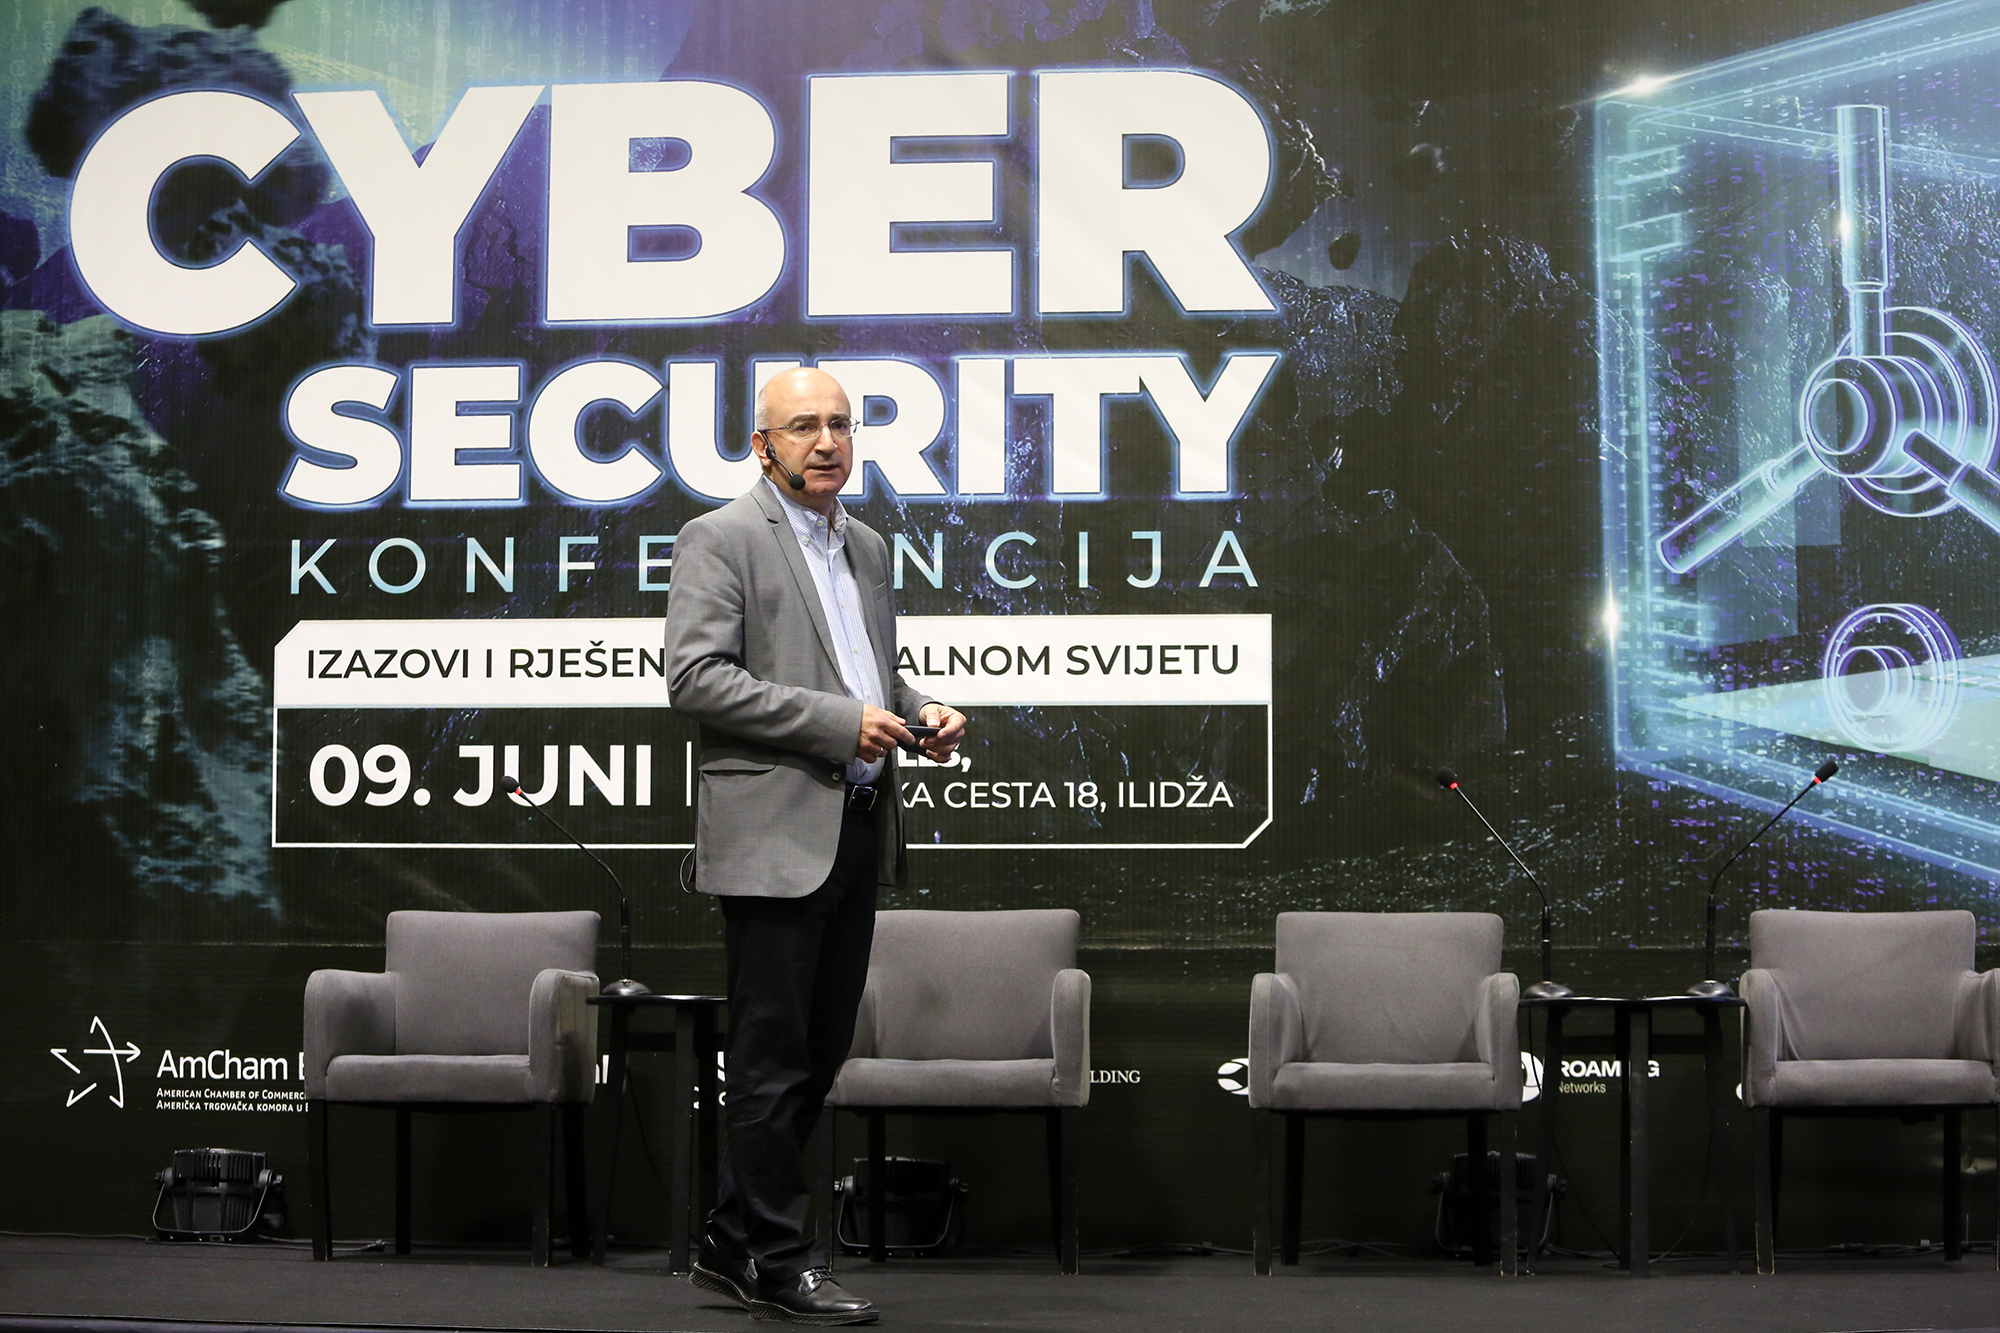 Cyber Security Conference